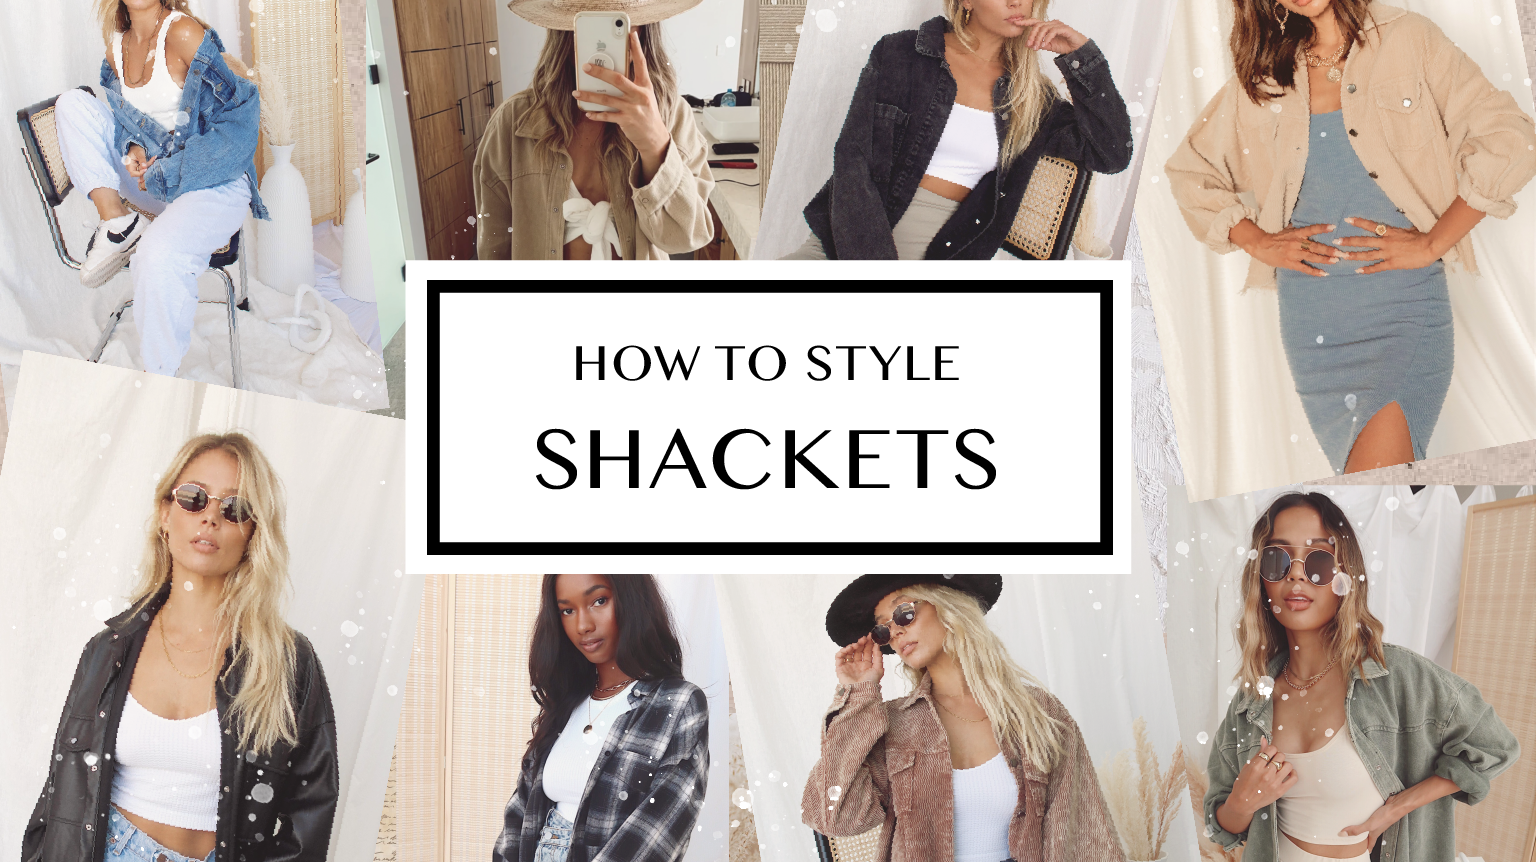 How to Style Shackets